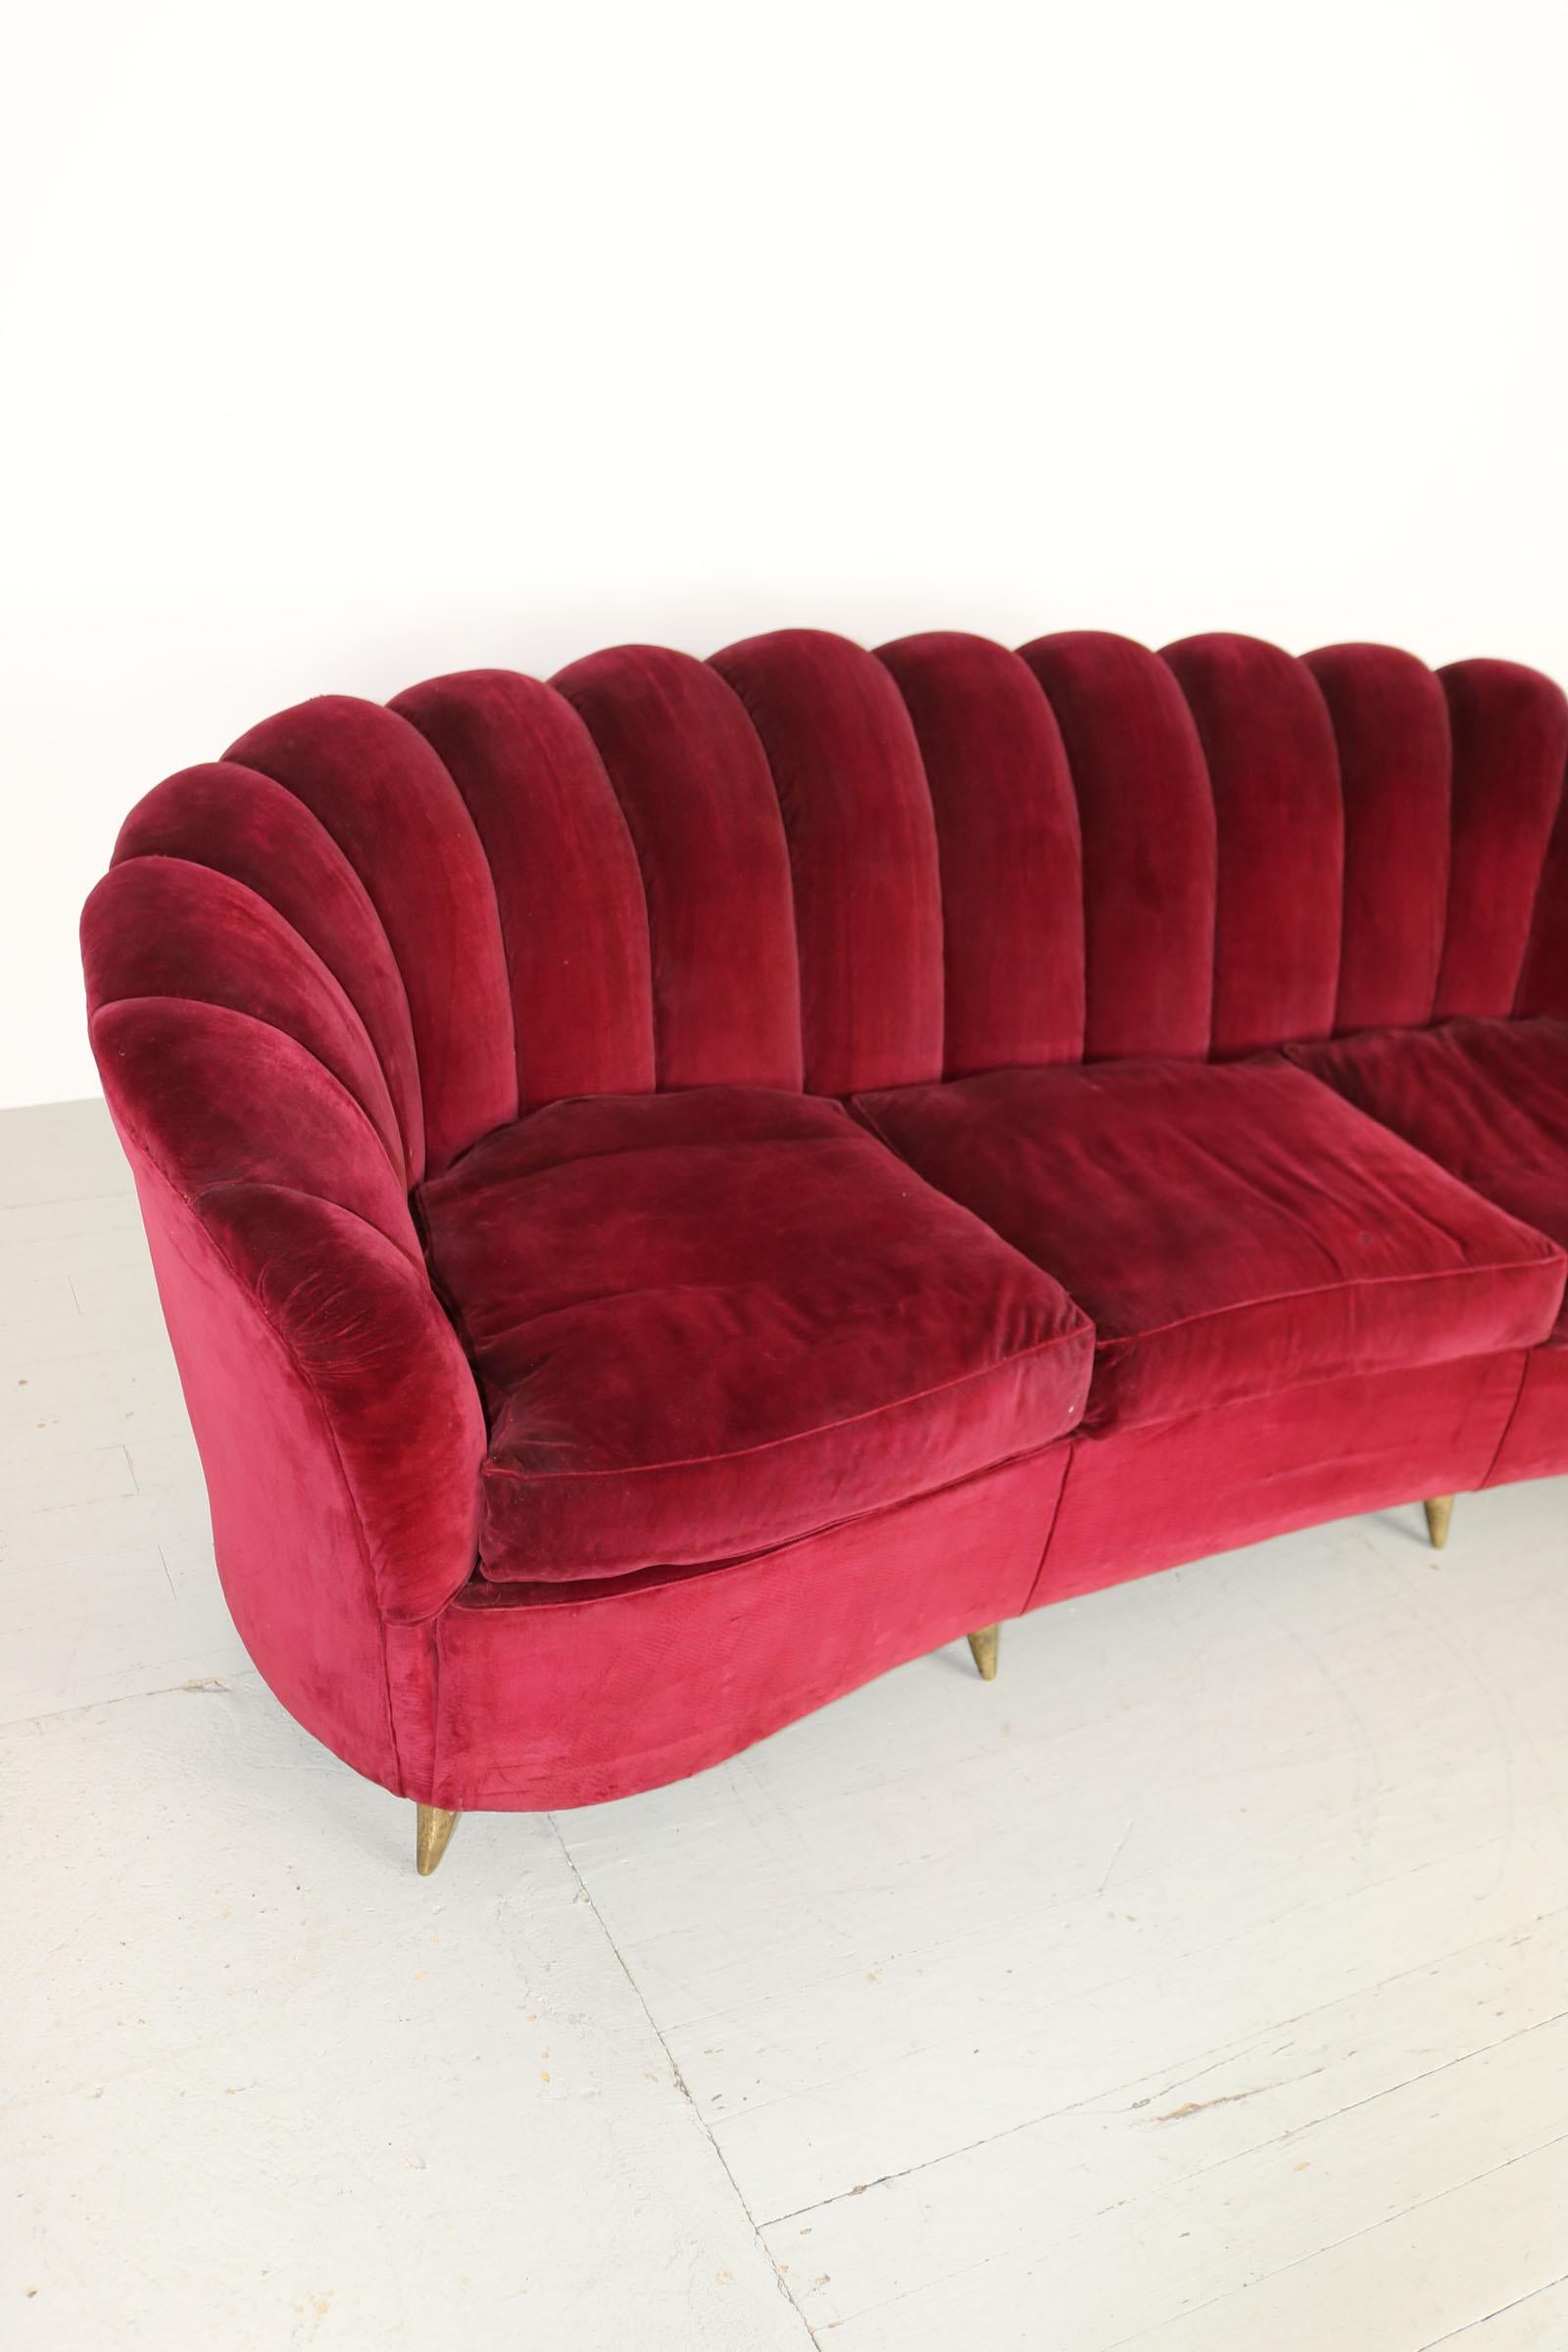 5 Piece Sofa Set for Reupholstering, Manufactured by Isa Bergamo in the 1950s For Sale 10